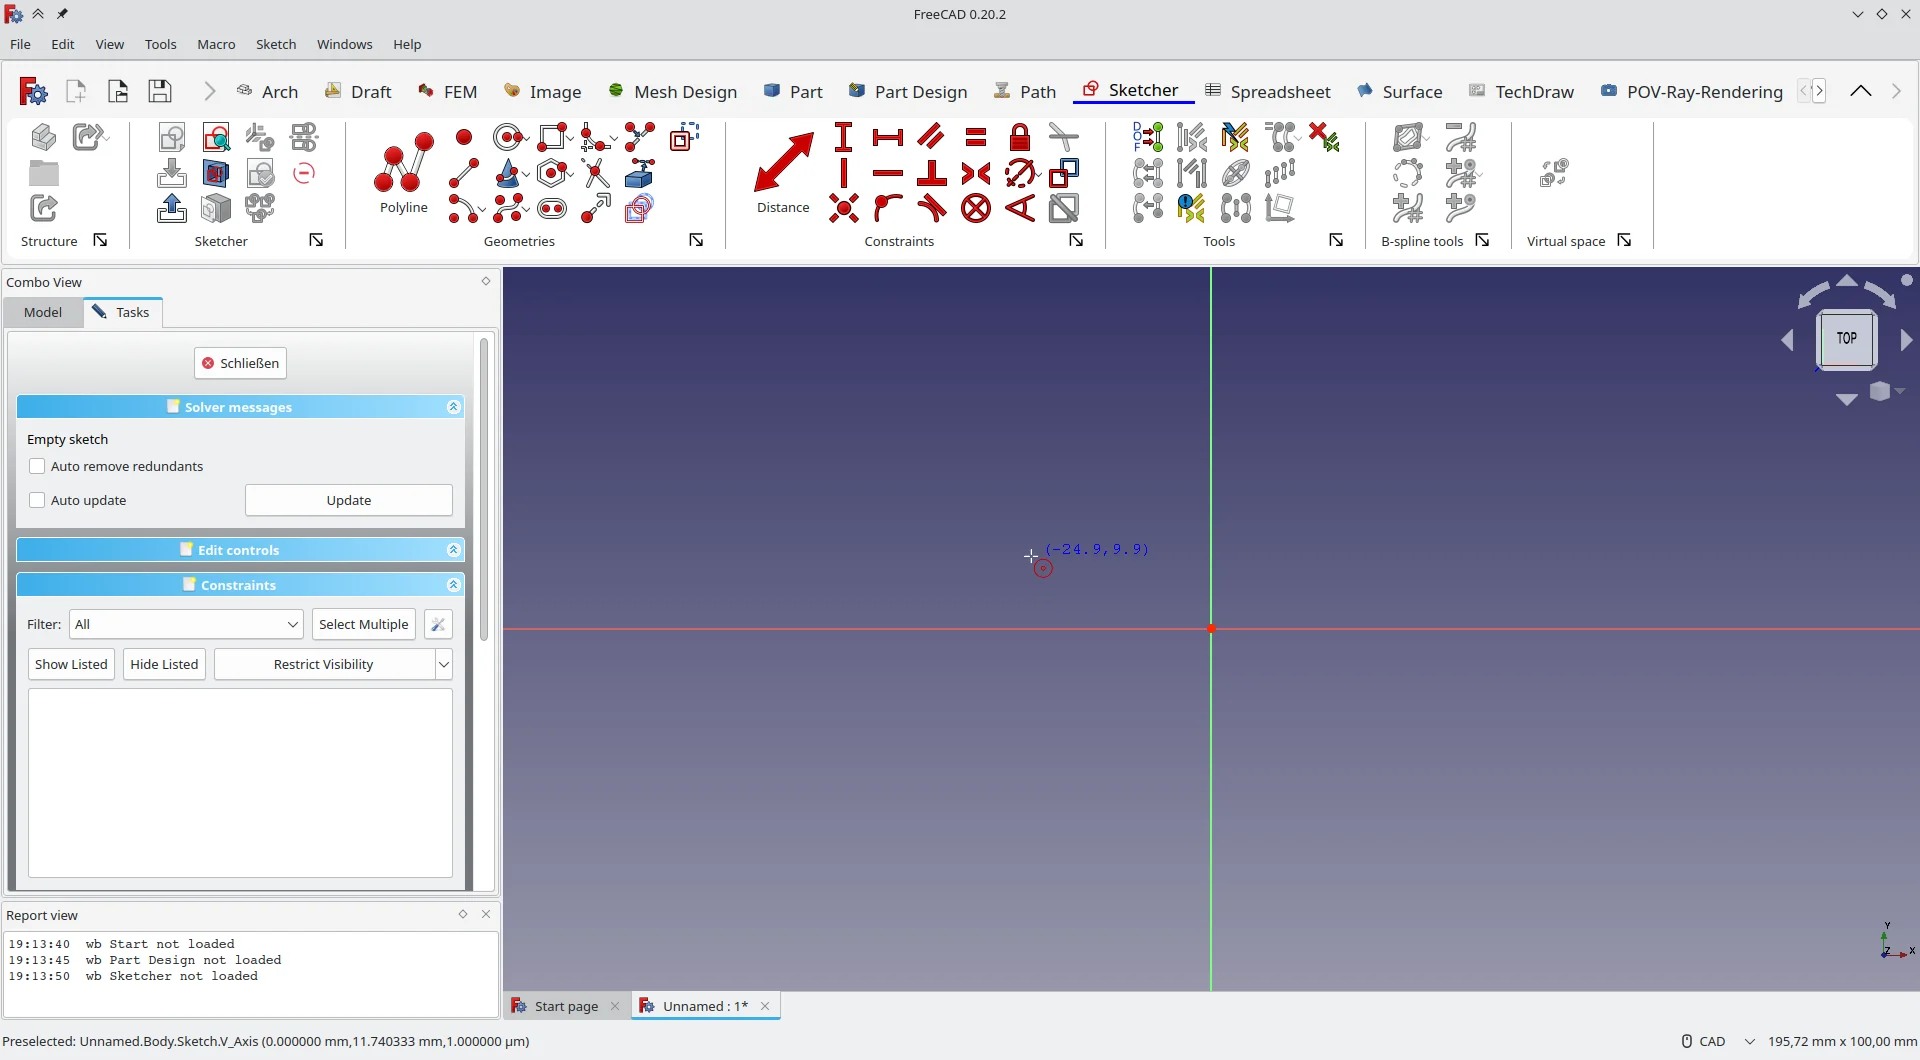 Draft implementation of Ribbon UI in FreeCAD